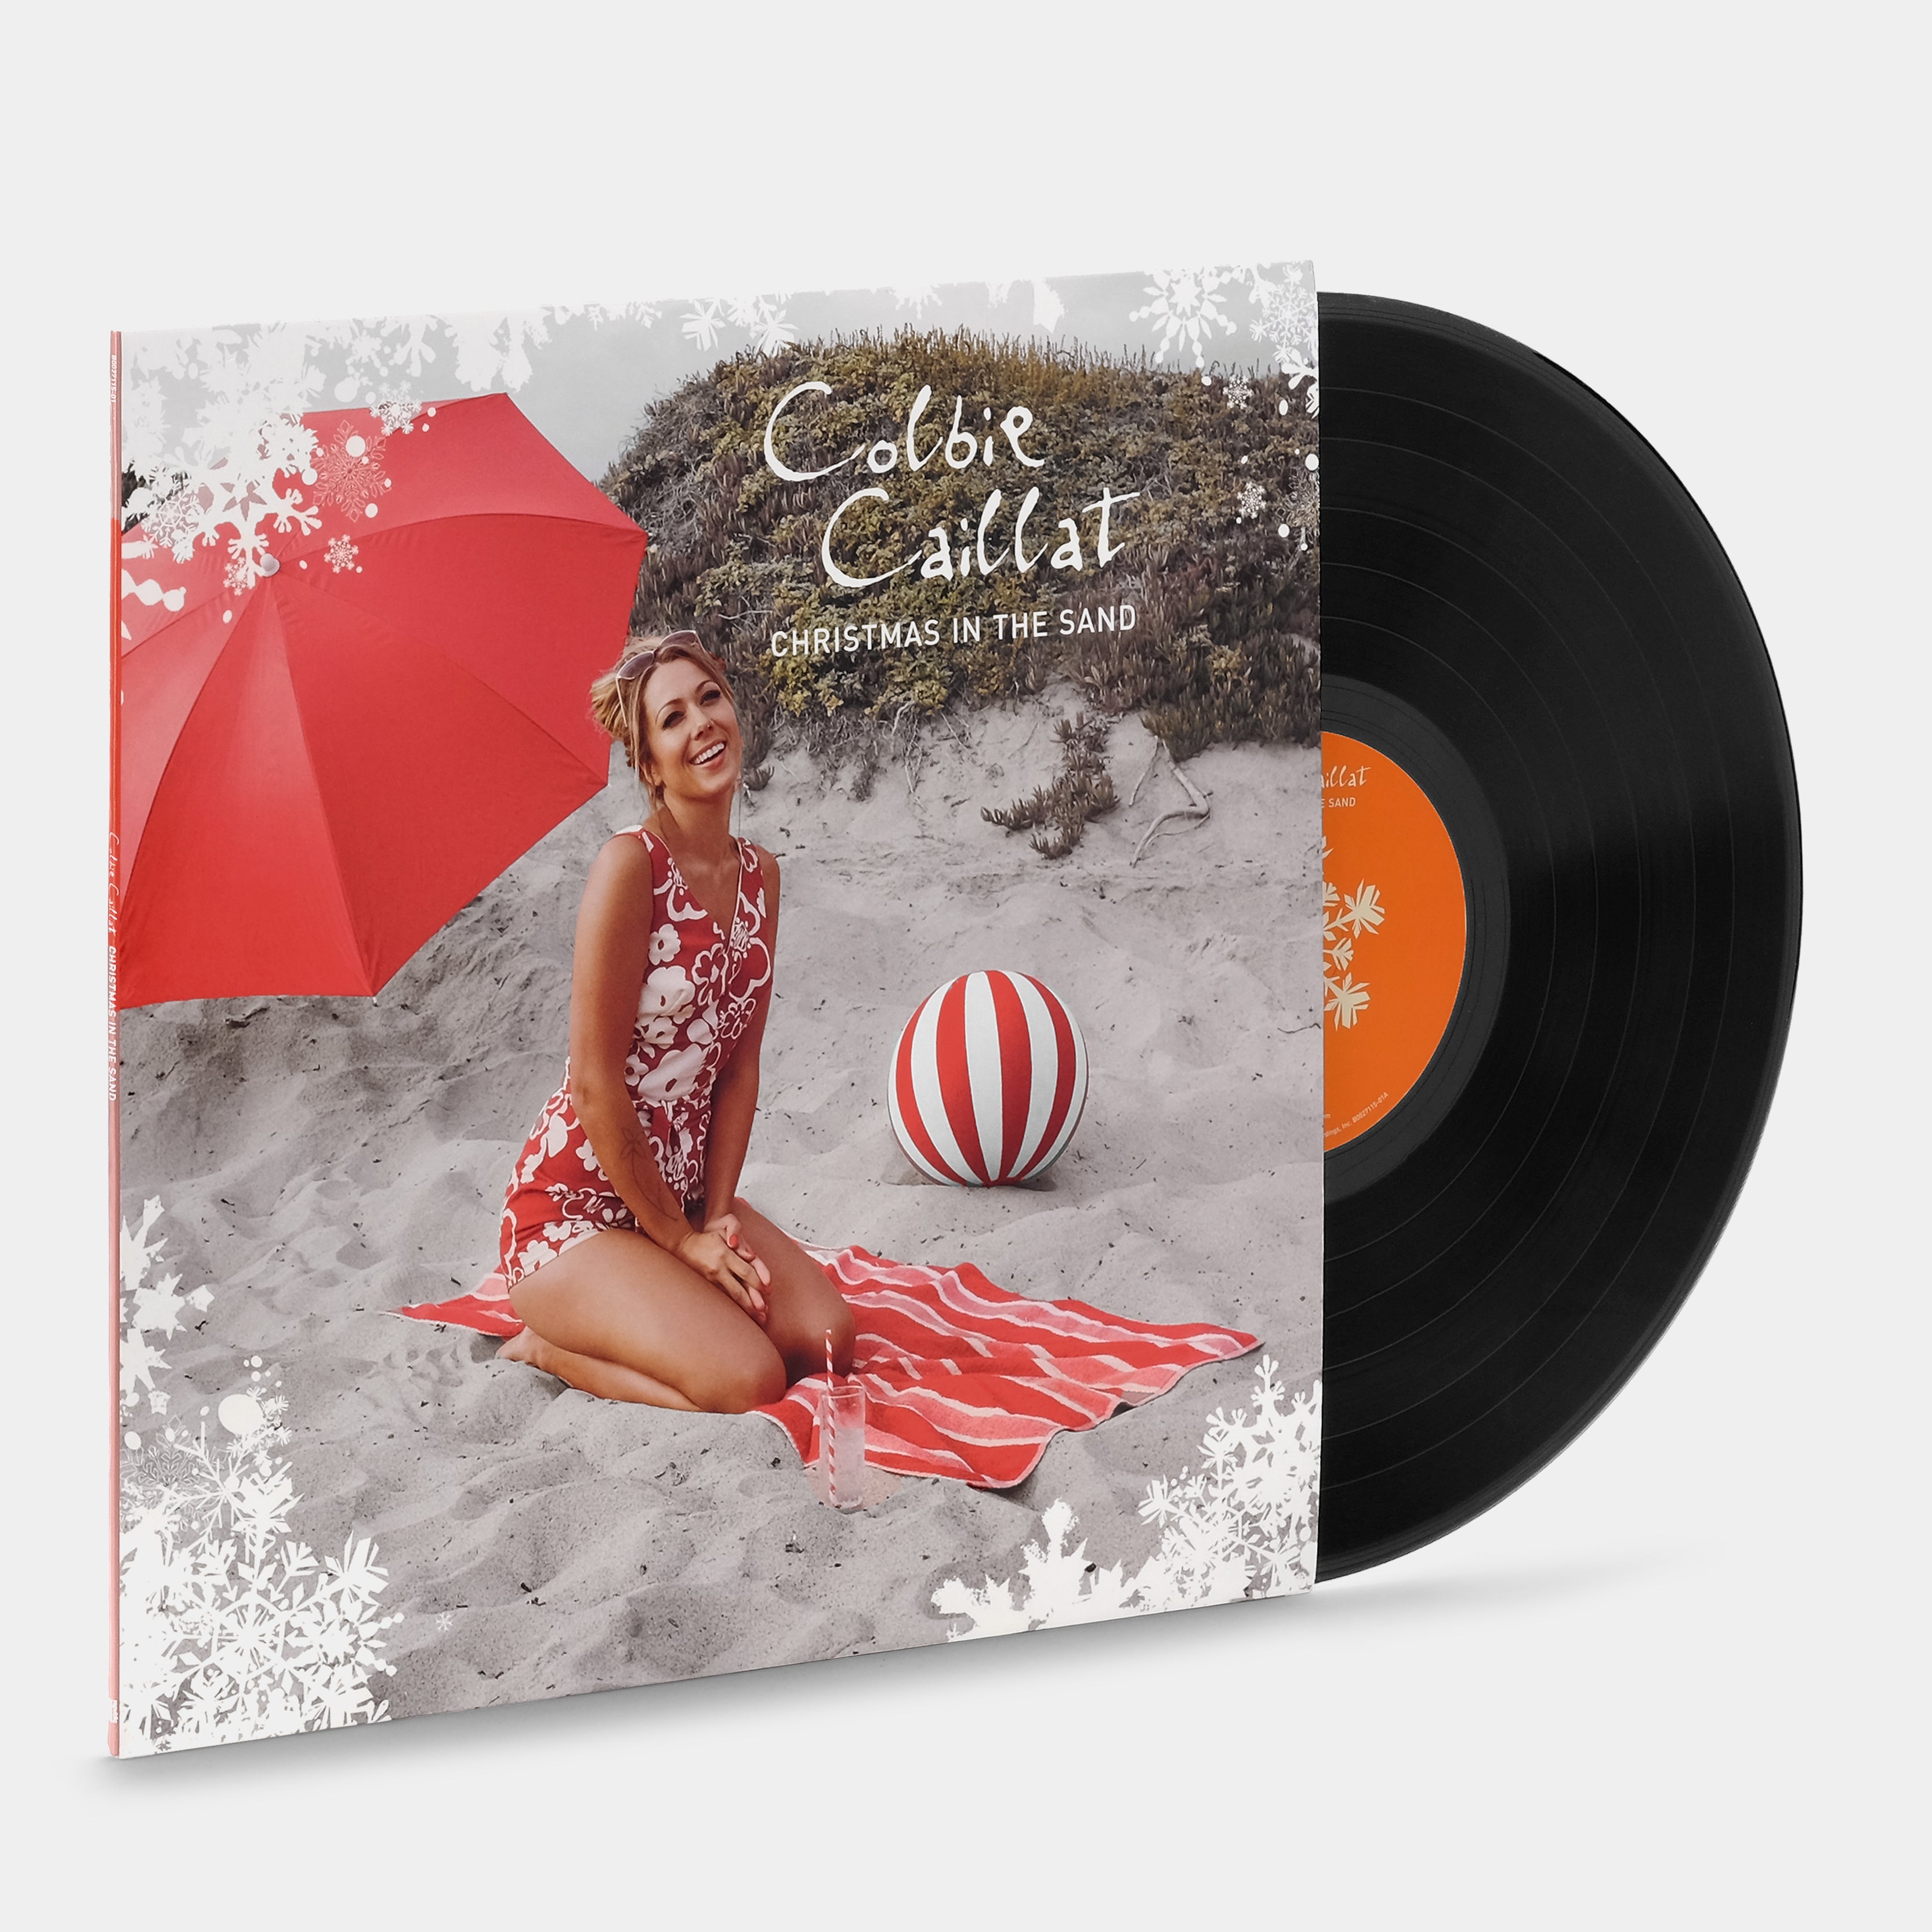 Colbie Caillat - Christmas In The Sand LP Vinyl Record